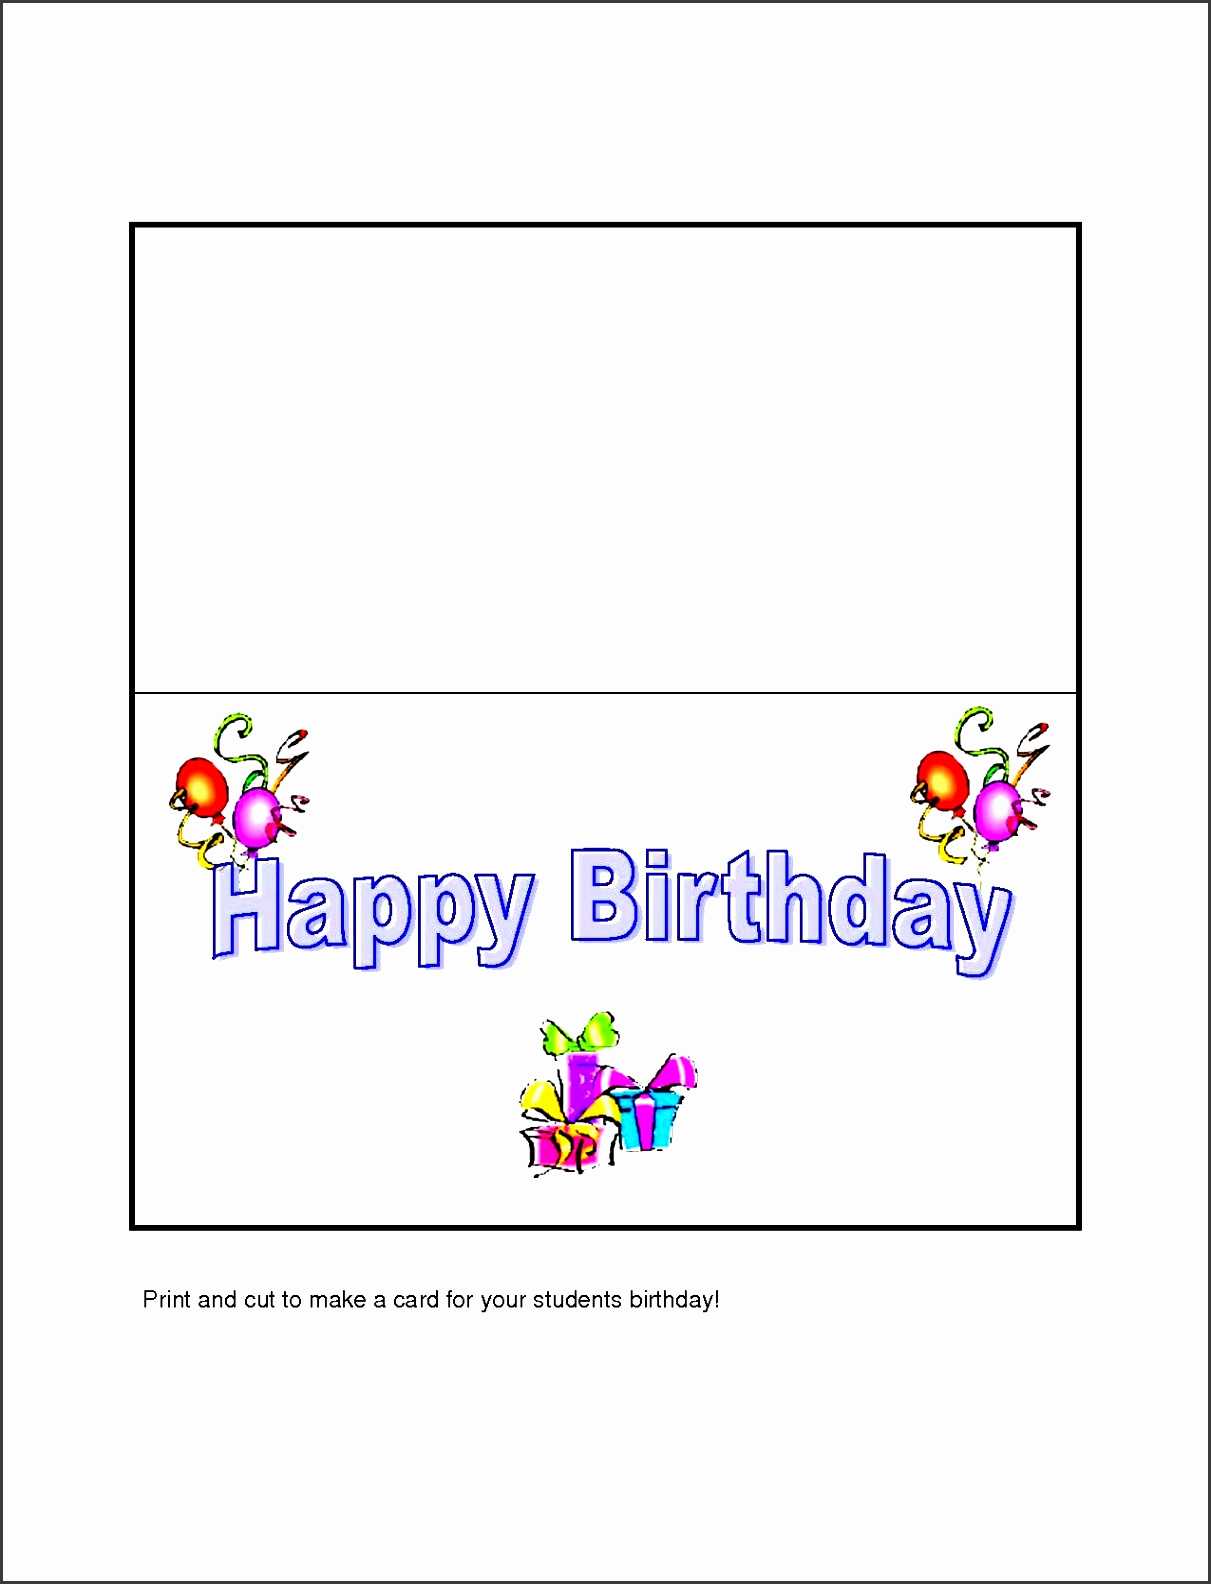 Beautiful 10 Free Microsoft Word Greeting Card Templates Intended For Birthday Card Template Microsoft Word